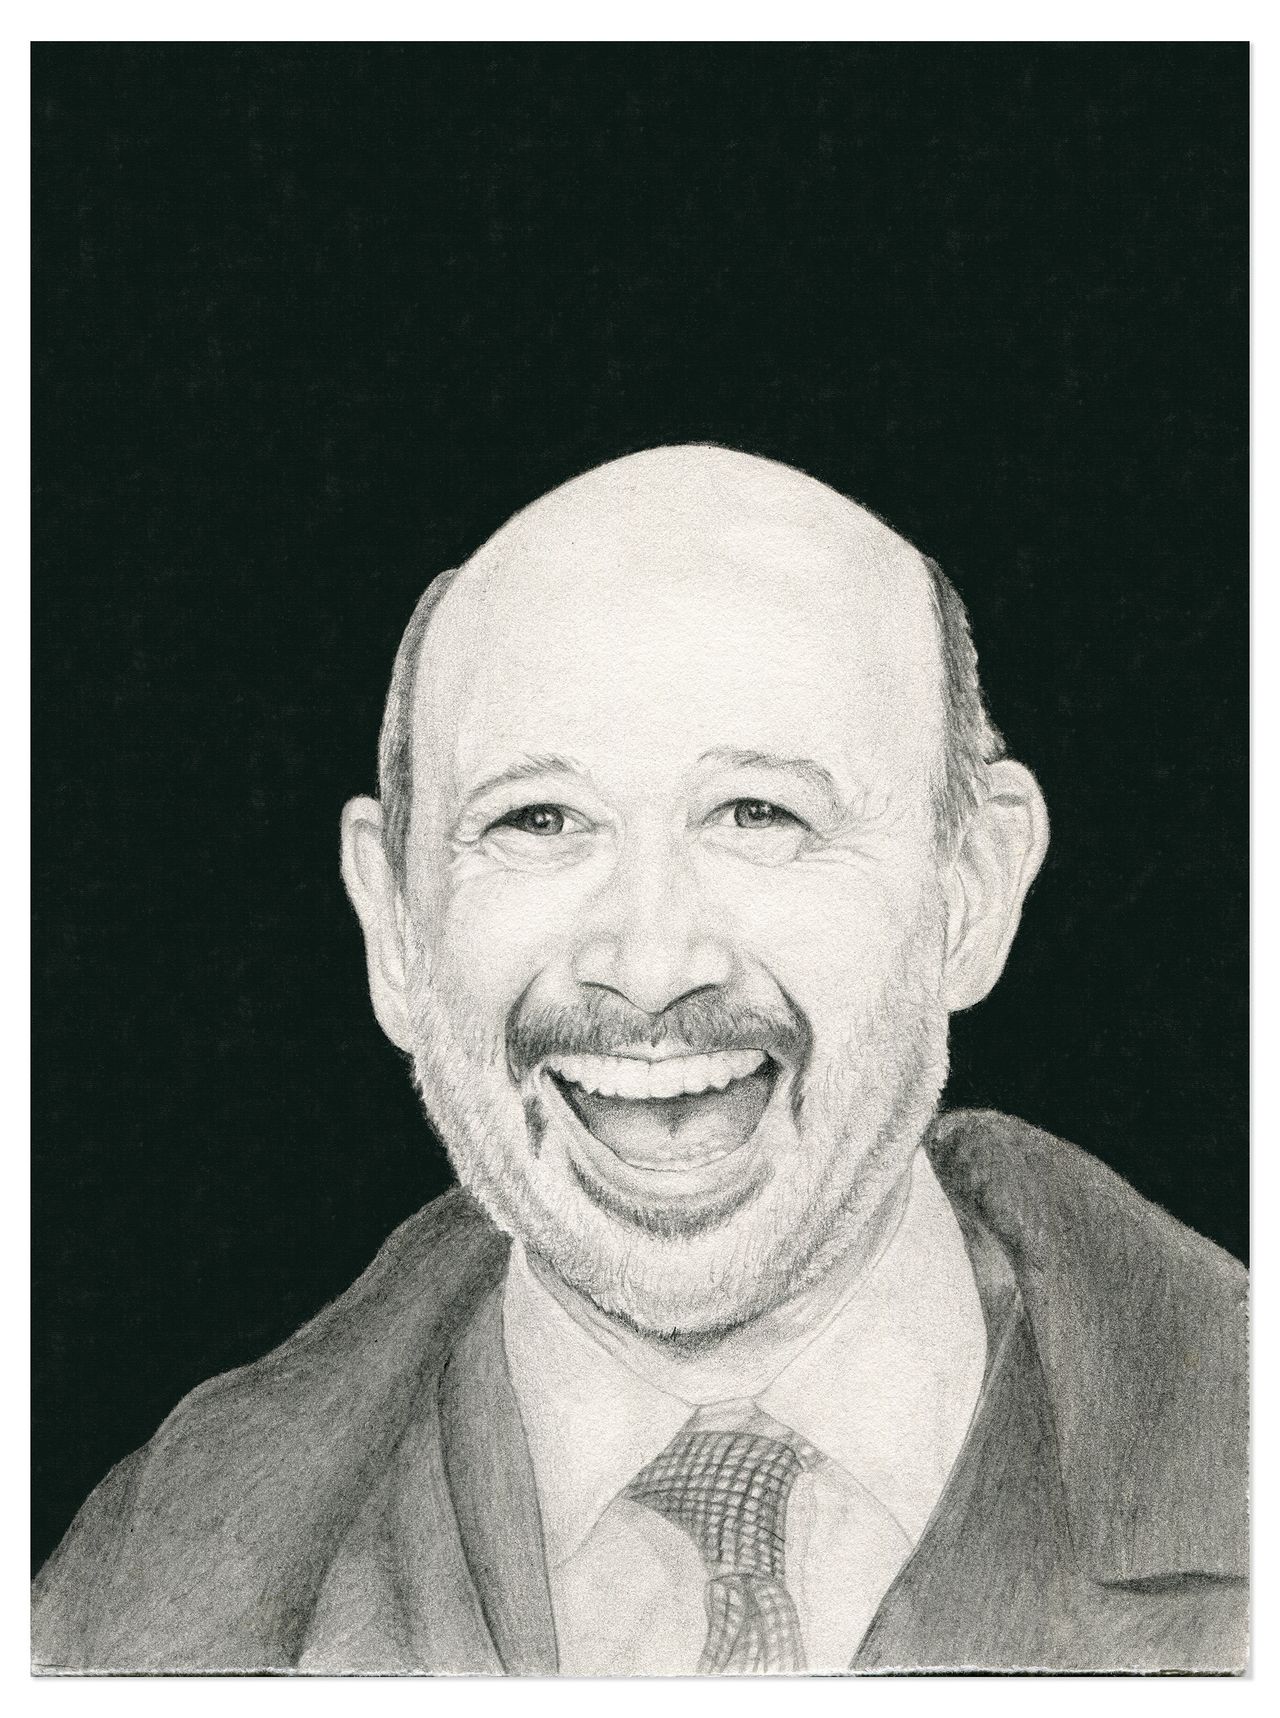 Ryan Gragg (Prison ID #1651297) drew CEO and chairman of Goldman Sachs Lloyd Blankfein. Blankfein is accused of bribery, mass deception and theft, obstruction of congress, securities fraud and stealing taxpayer money. Gragg is currently serving 15 years for murder. Read more here.